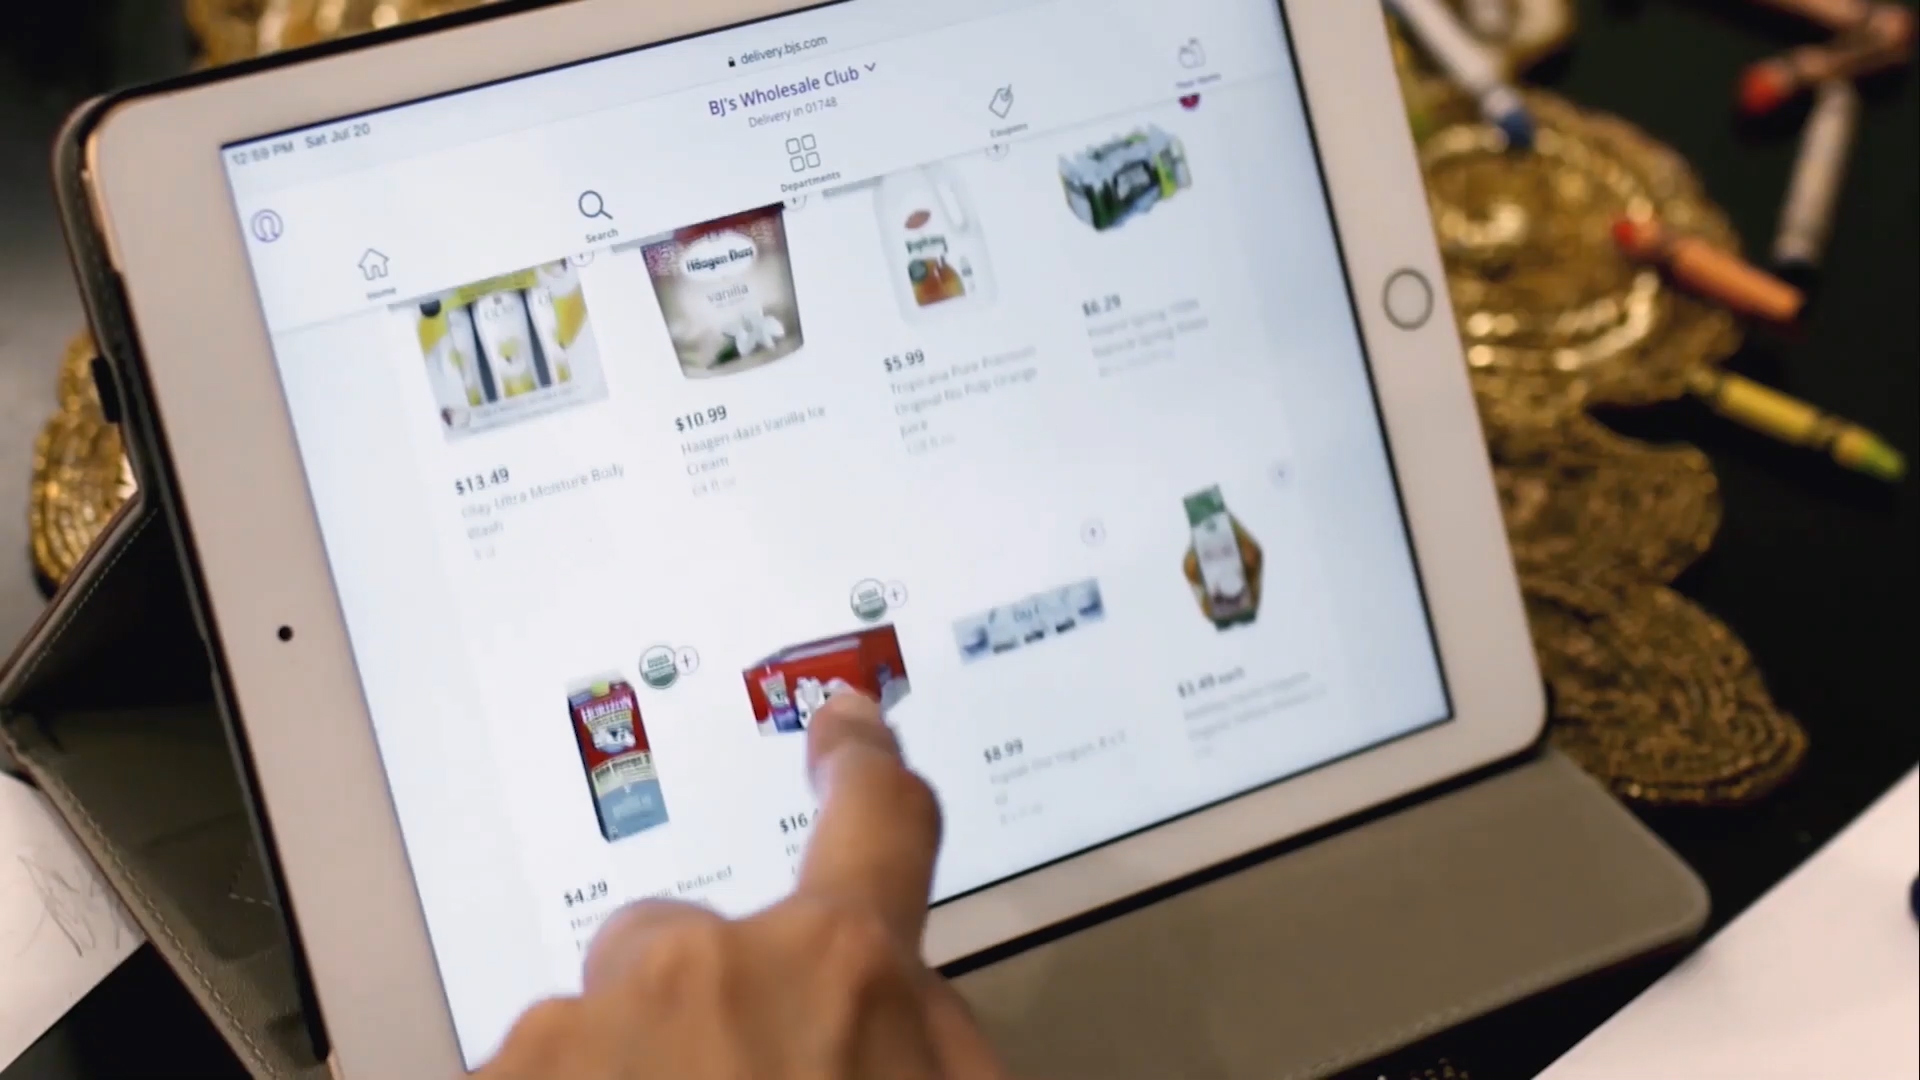 BJ’s Wholesale Club taps Adobe Experience Platform to enhance its membership and marketing engagement strategy.